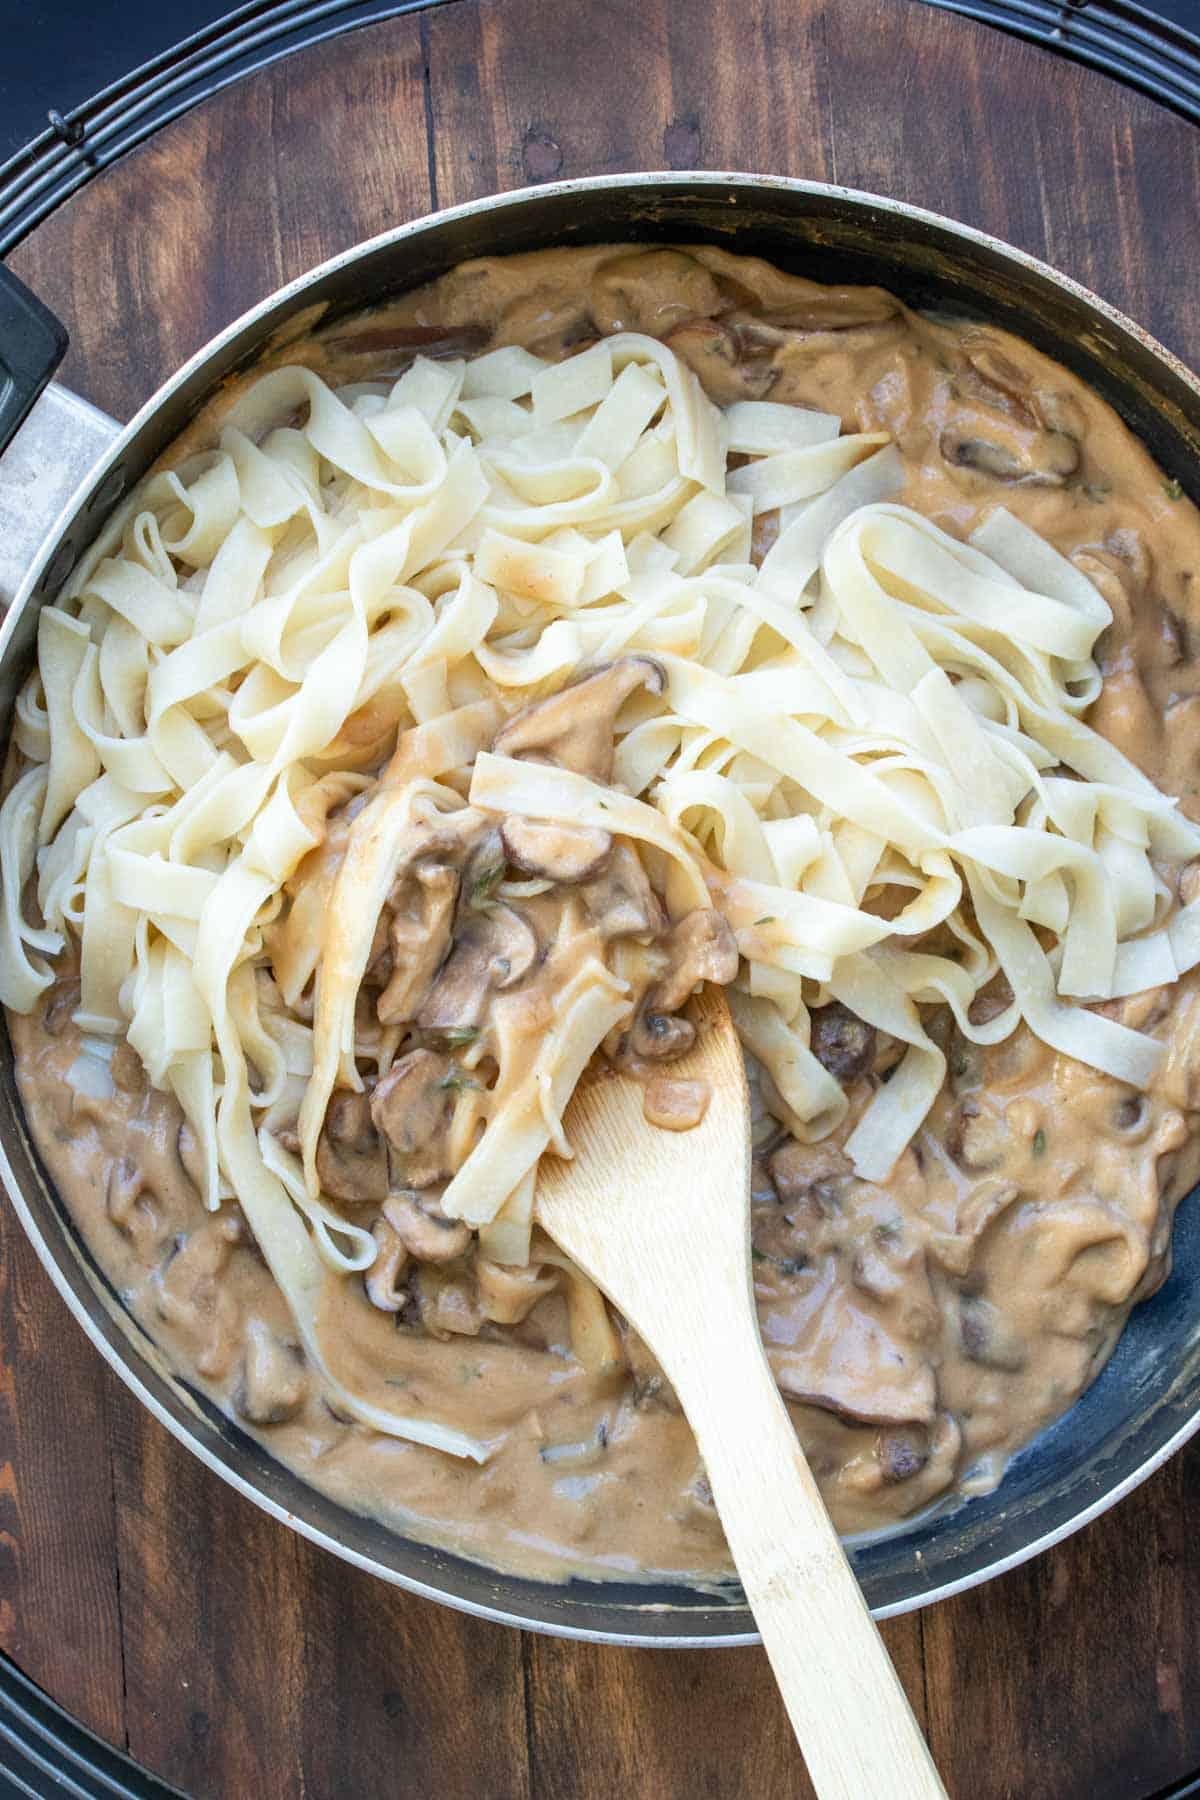 Fettuccini noodles bring mixed into a tan creamy sauce with mushrooms.